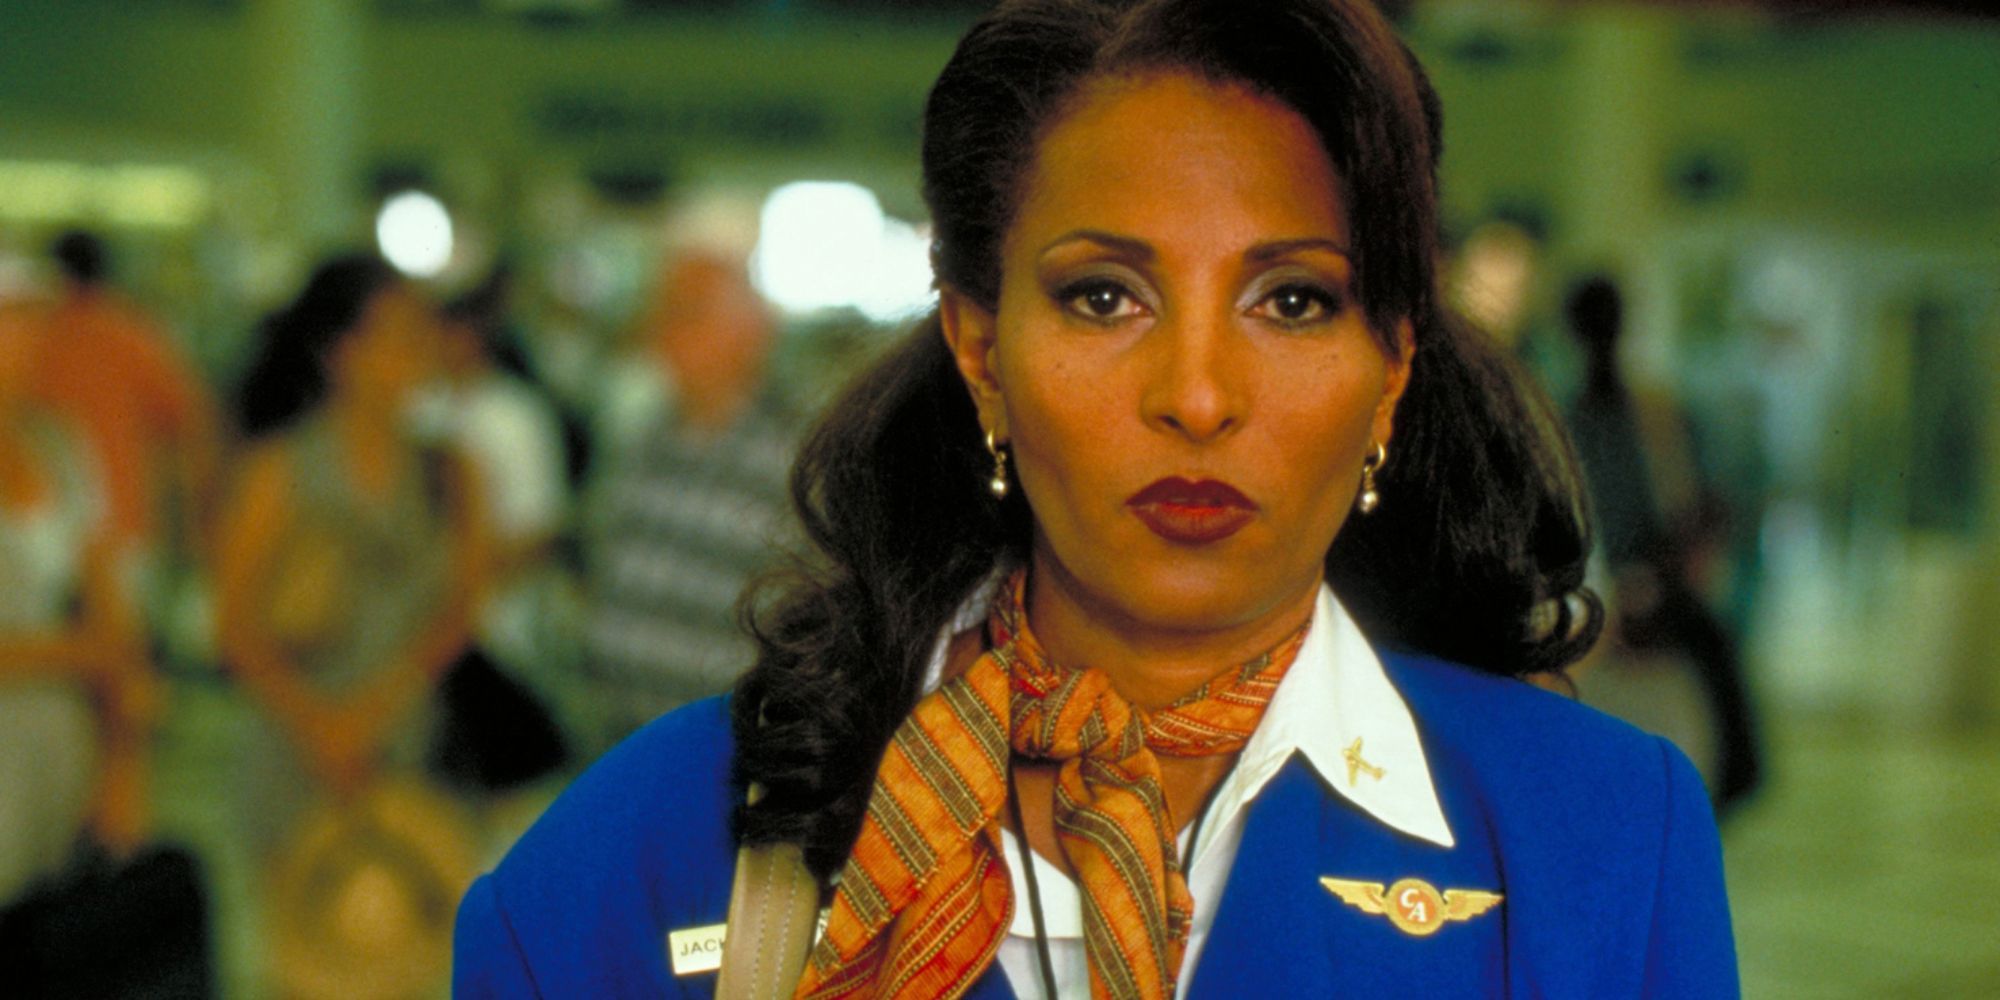 Pam Grier in Jackie Brown looking at someone or something off-camera.